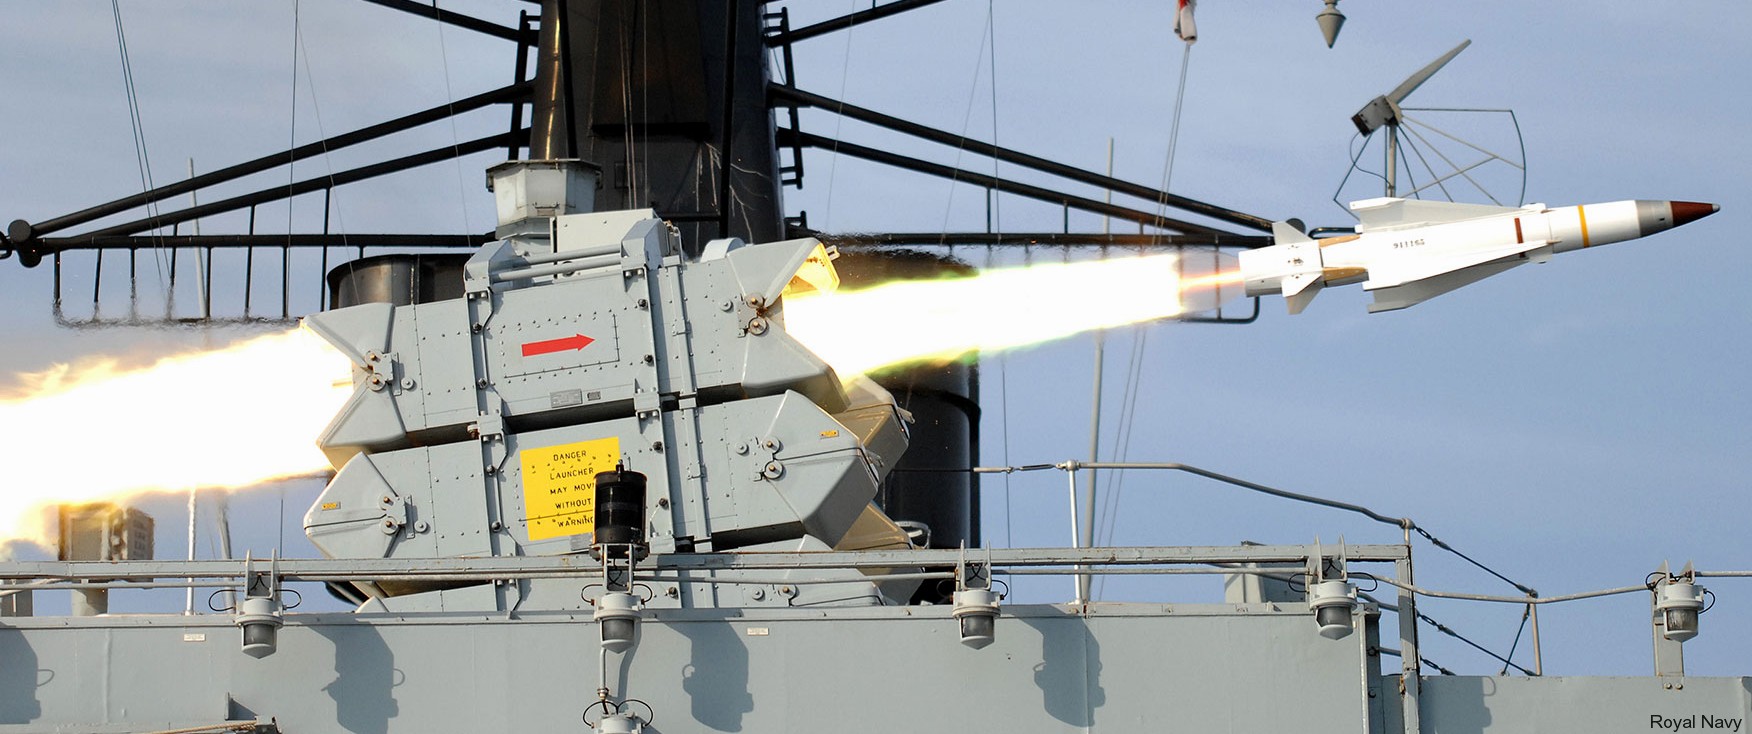 sea wolf sam missile gws-25 guided weapon system six-way box launcher type 22 broadsword class frigate royal navy 02